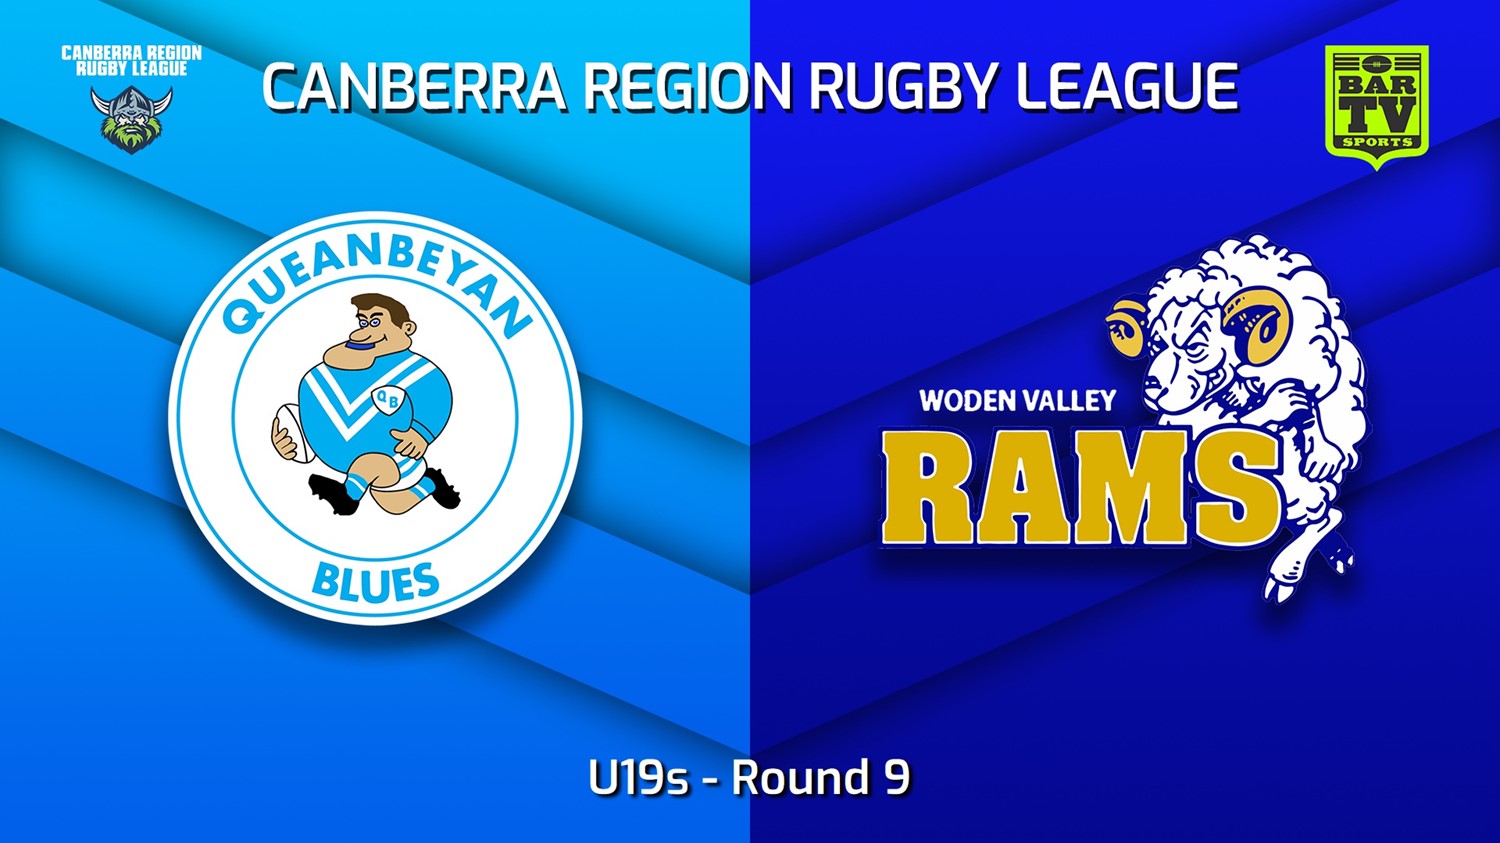 220625-Canberra Round 9 - U19s - Queanbeyan Blues v Woden Valley Rams Slate Image